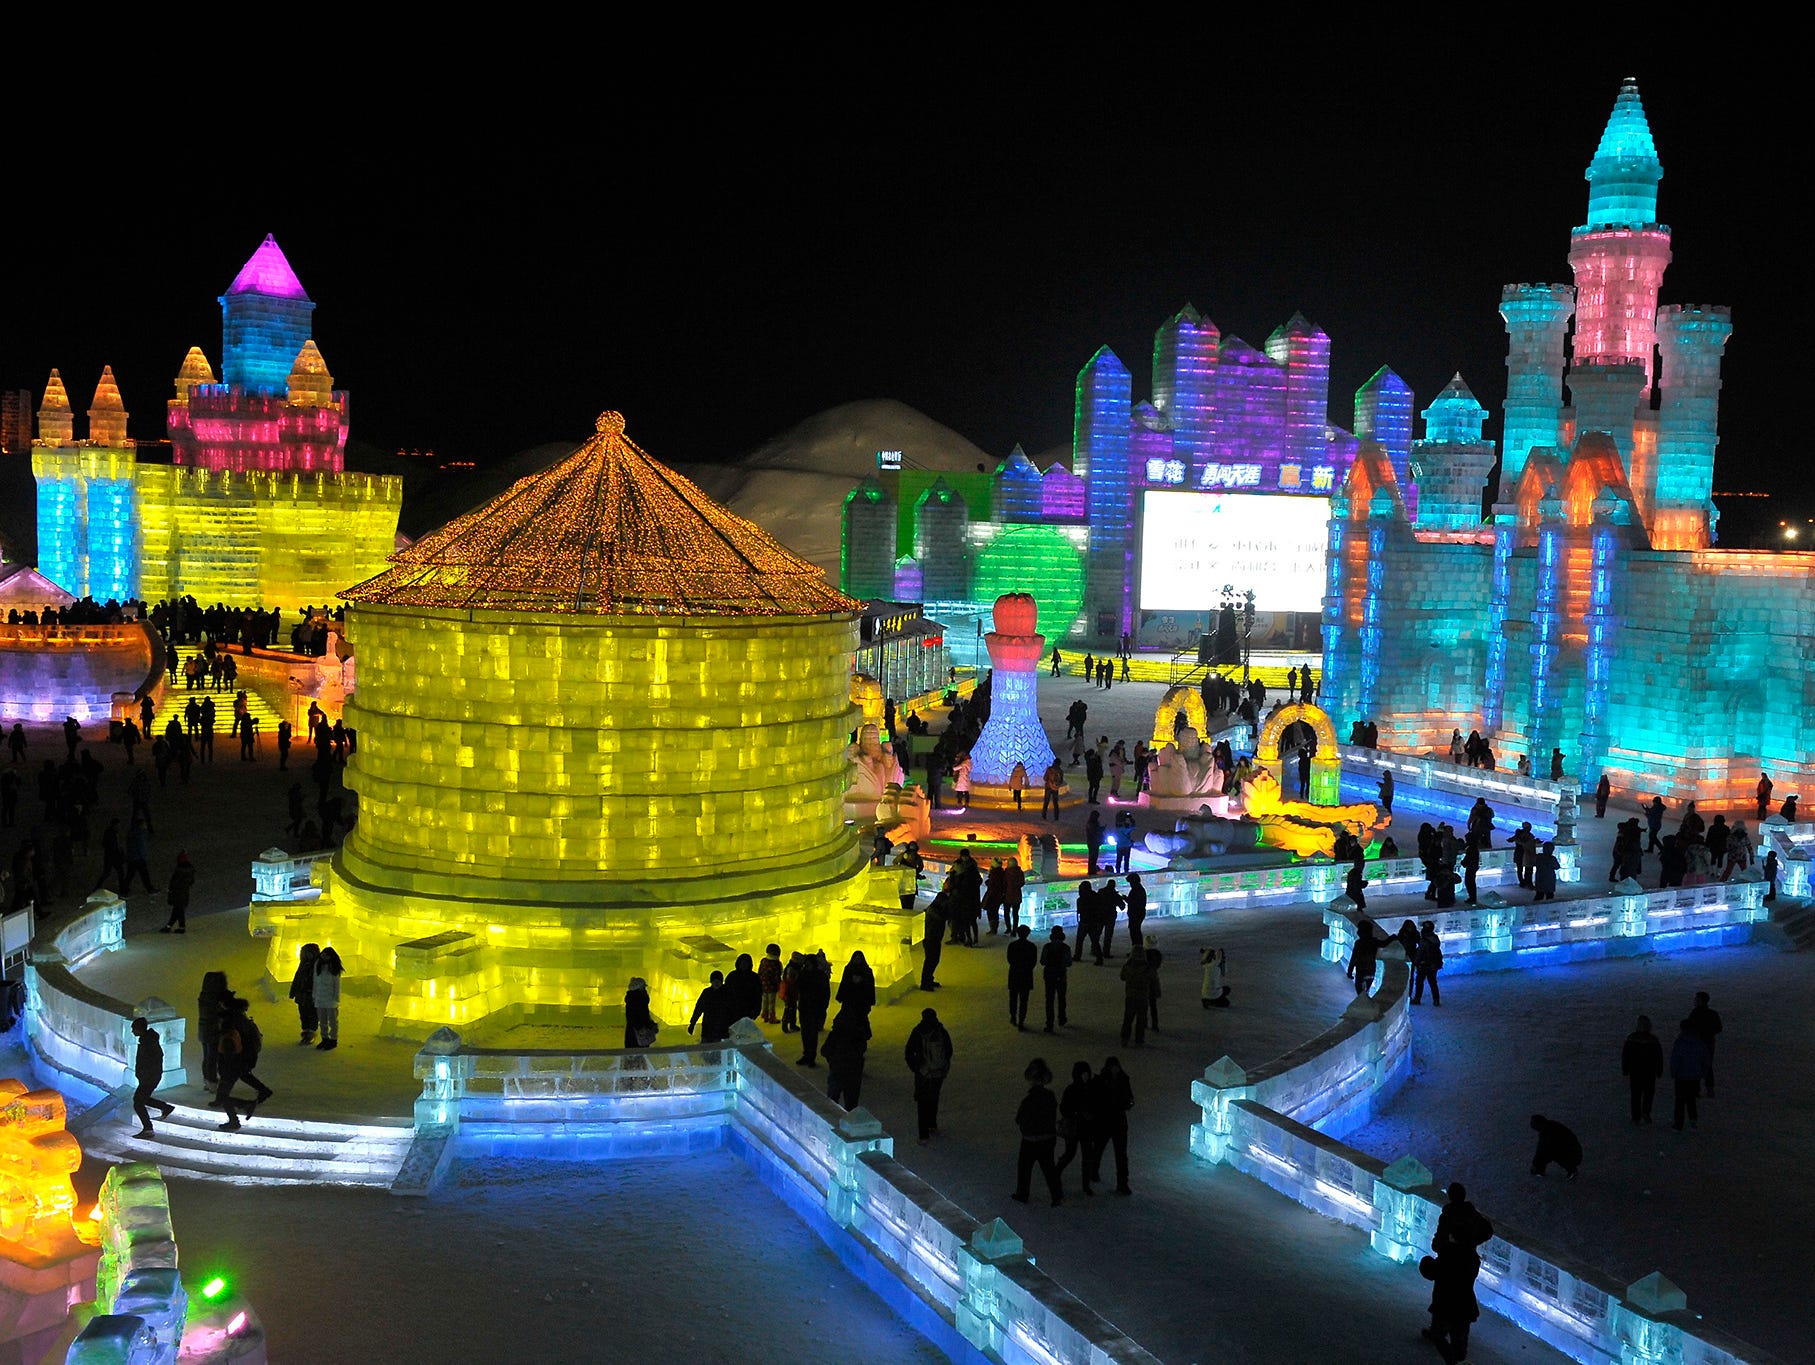 epa04547328 People tour between the large-scale ice sculptures at the Ice and Snow World in Harbin city, Heilongjiang province, China, 05 January 2015. The 31th Harbin International Ice and Snow Festival kicks off on 05 January that will last about t